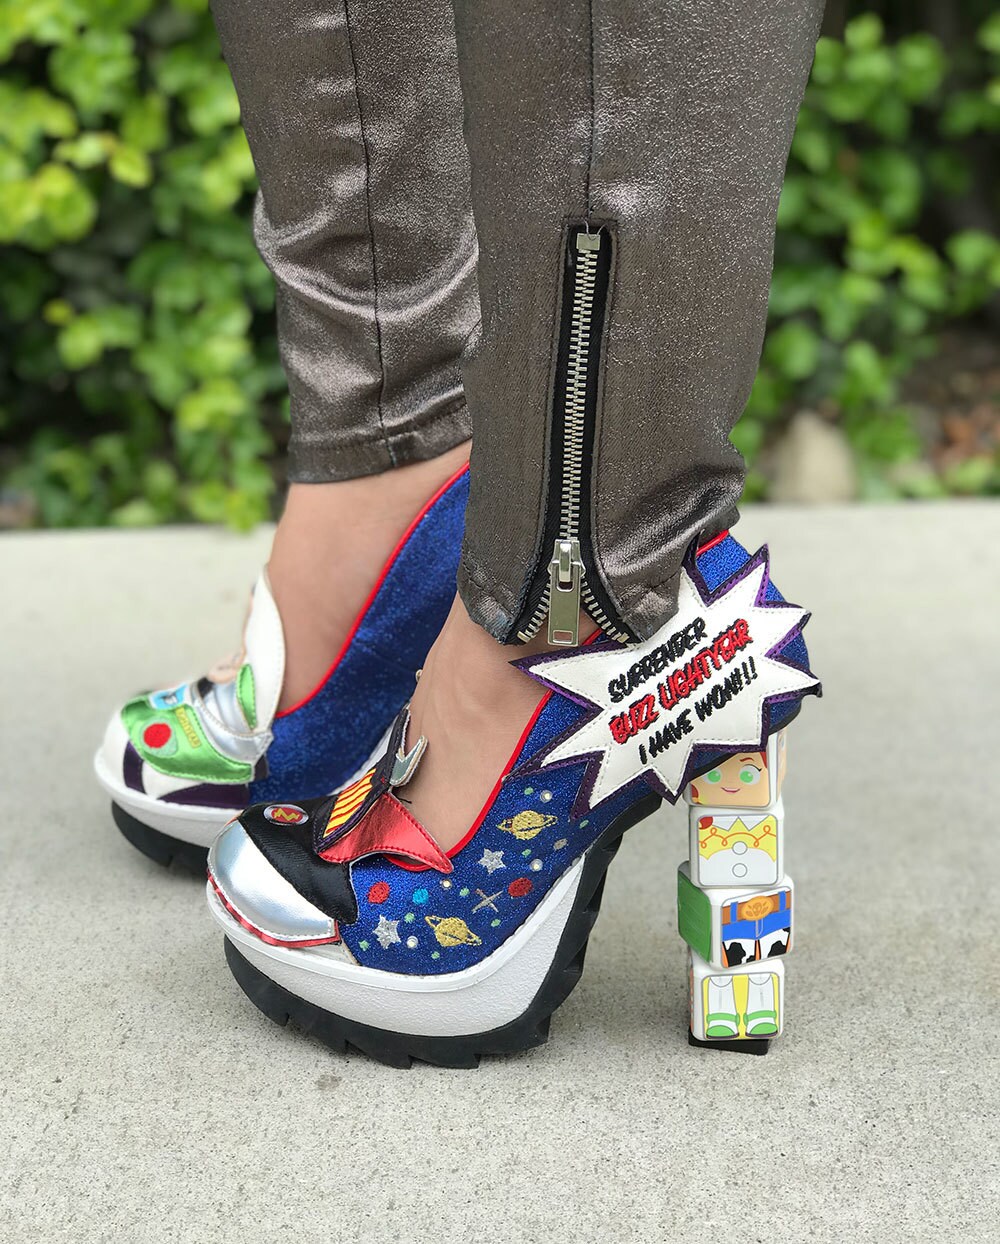 Shoes from The Toy Story Irregular Choice Collection